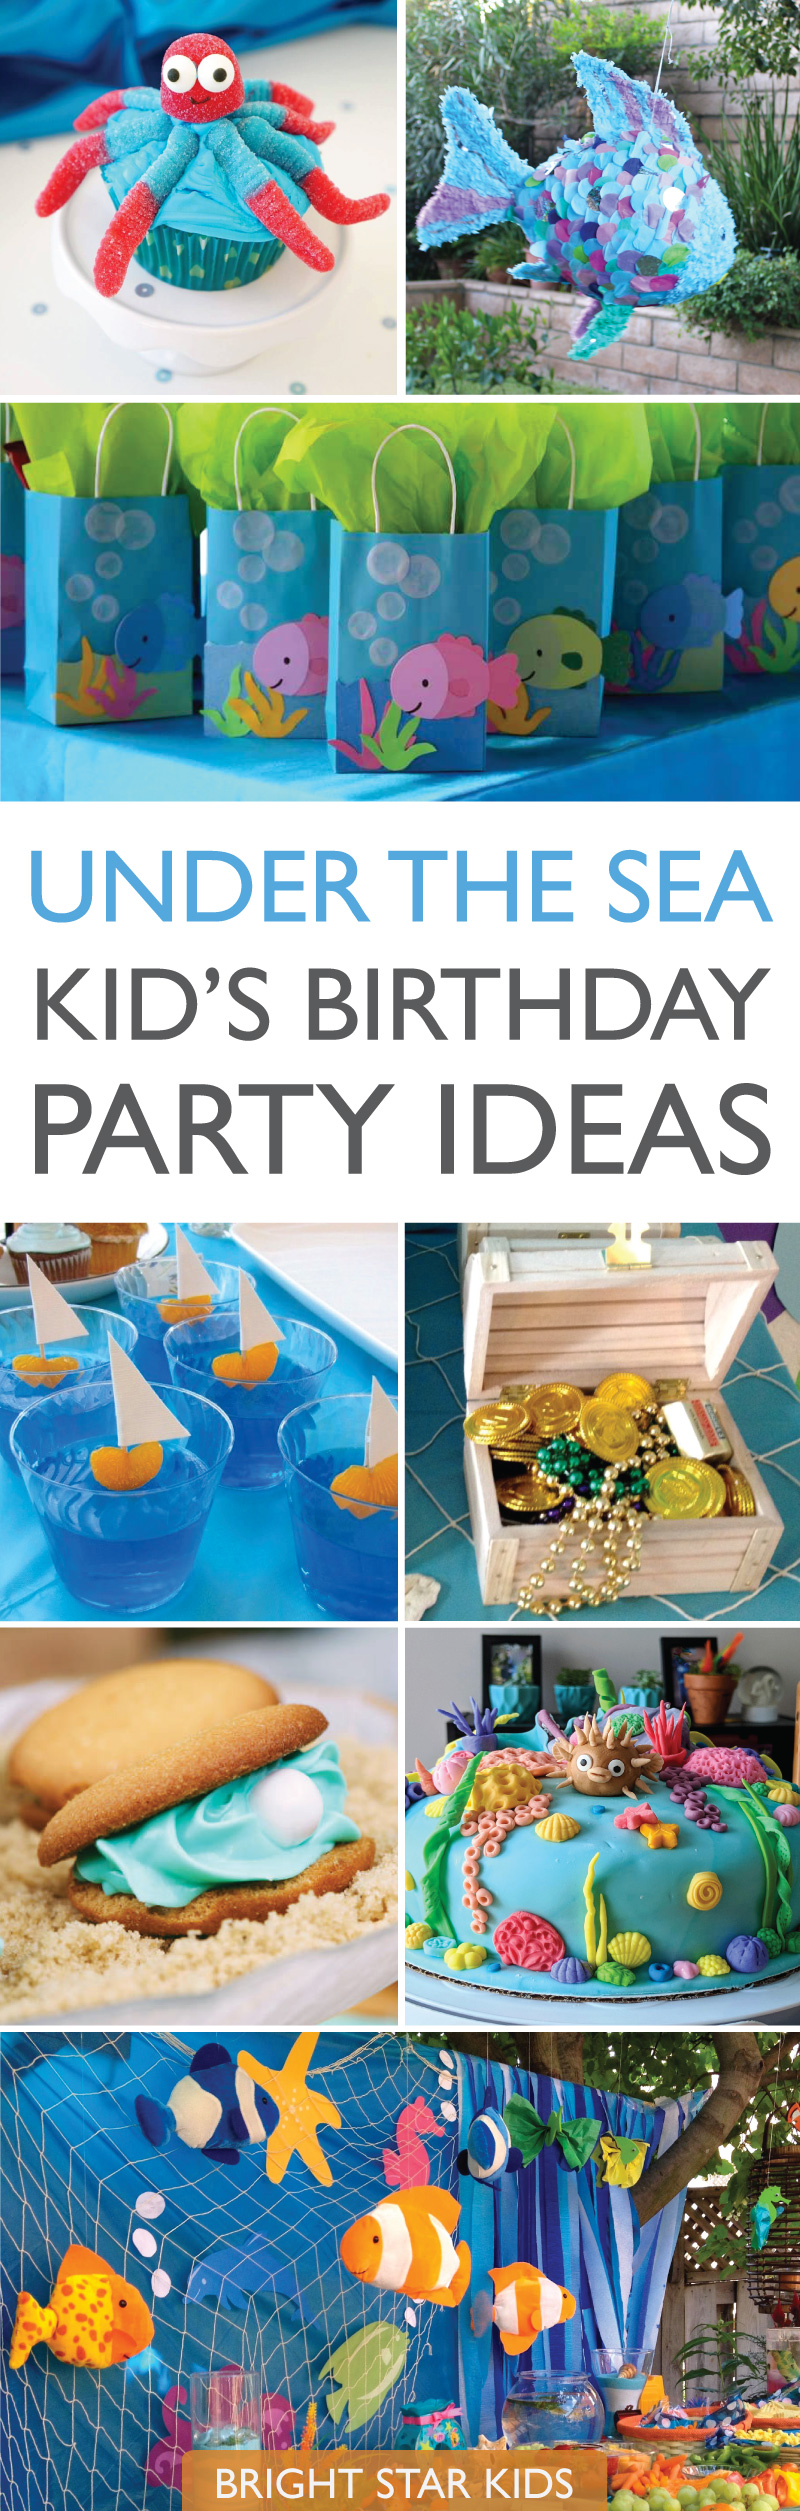 Under The Sea Kids Party Ideas Bright Star Kids